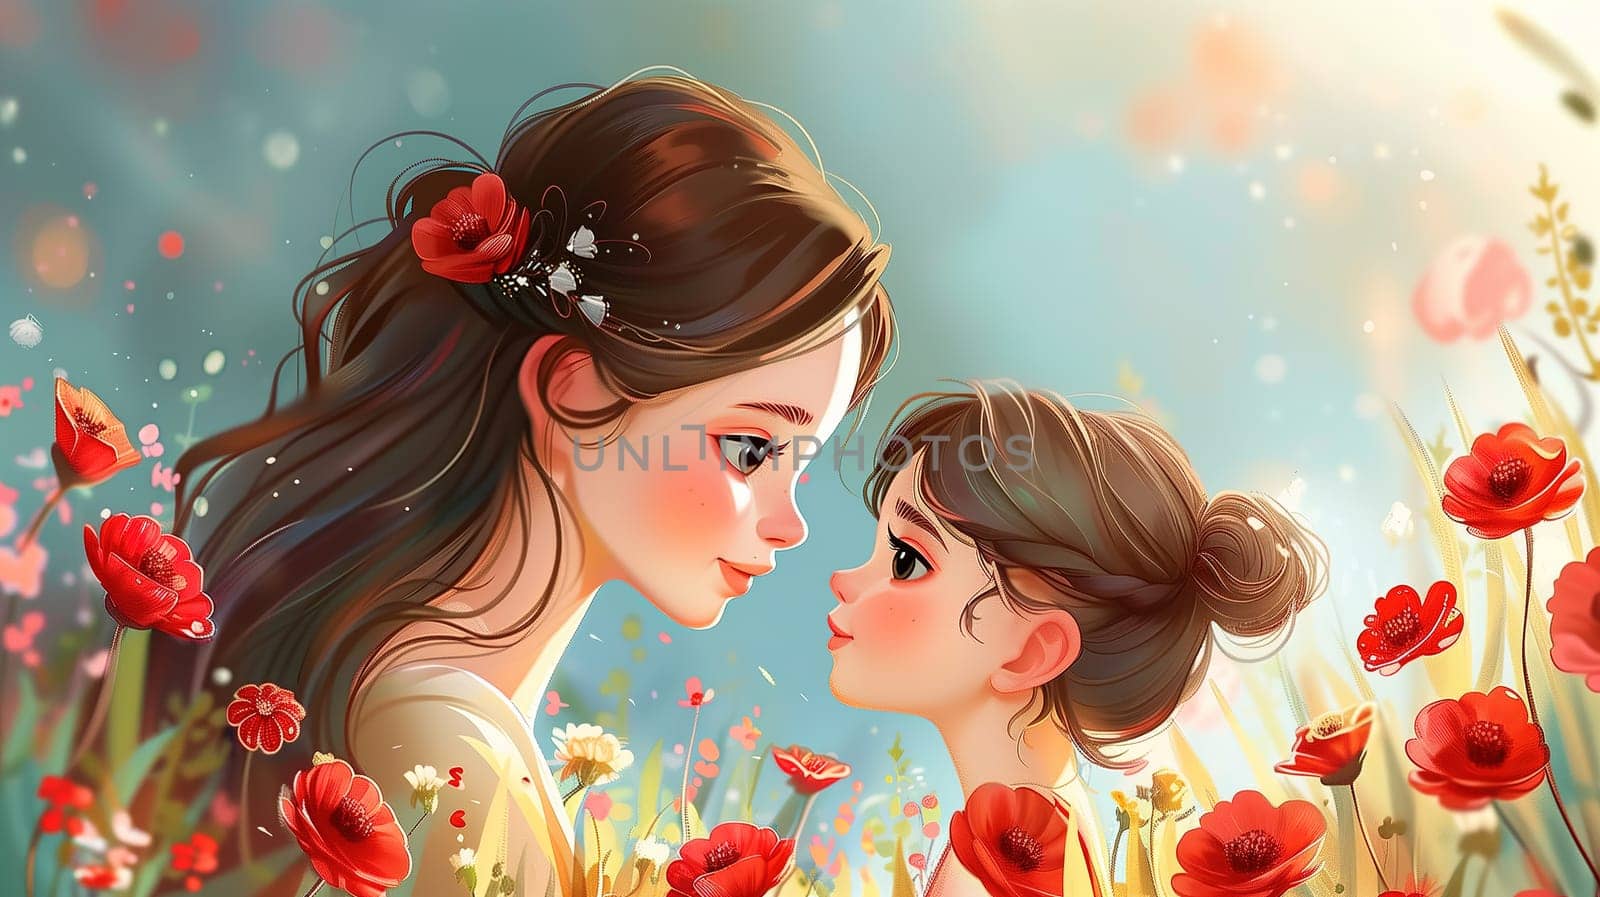 A painting depicting two girls standing in a vibrant field of colorful flowers, surrounded by a sea of petals and green foliage. The girls seem to be enjoying the nature around them, with one holding a bouquet of flowers.